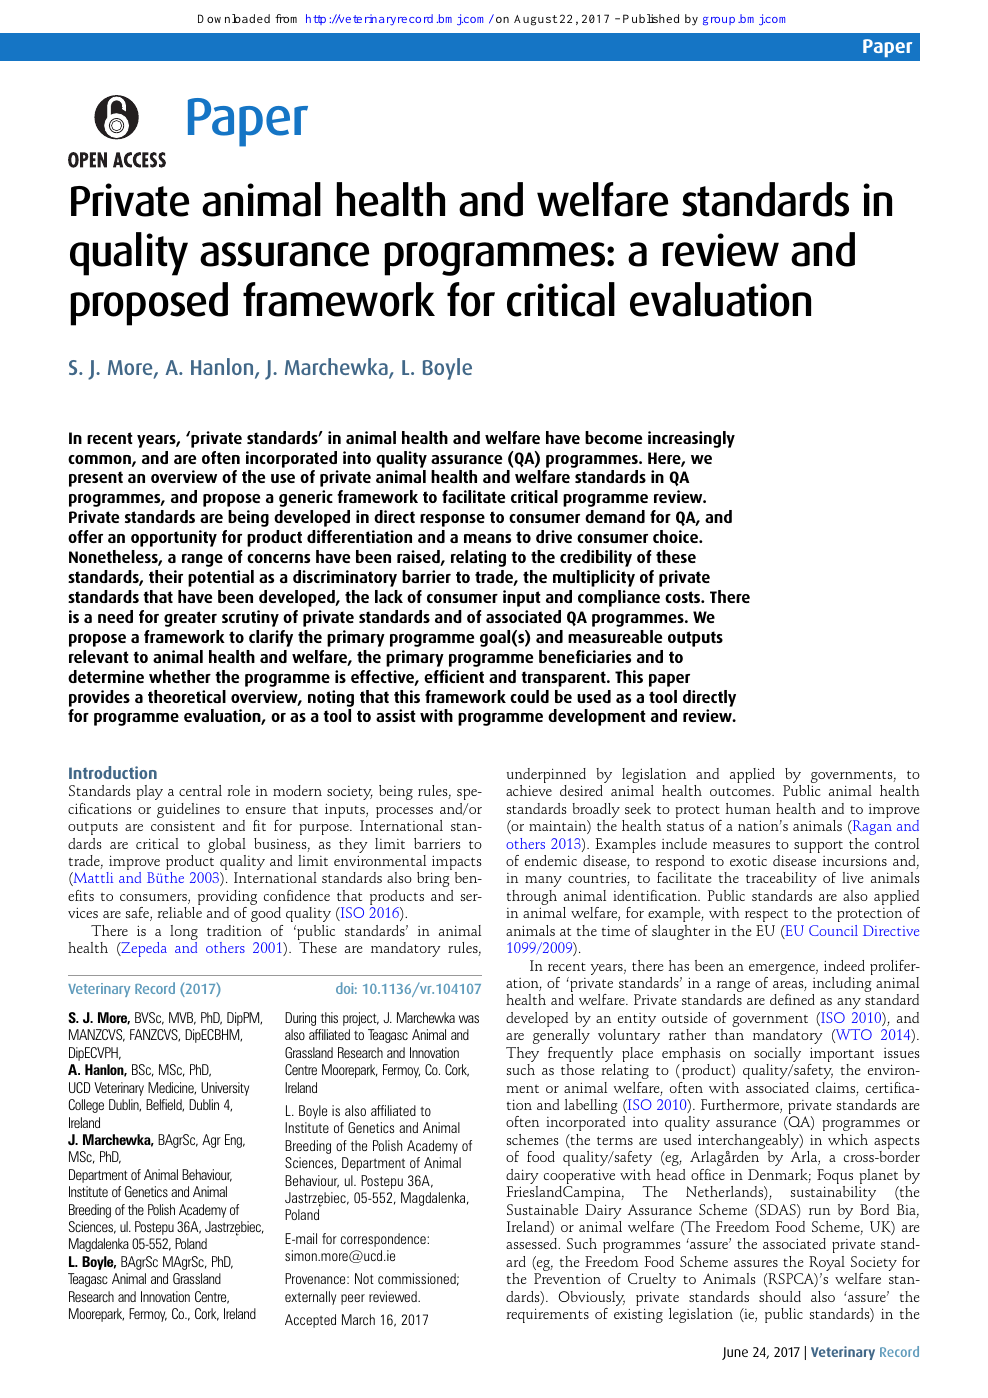 Private animal health and welfare standards in quality assurance  programmes: a review and proposed framework for critical evaluation – topic  of research paper in Veterinary science. Download scholarly article PDF and  read